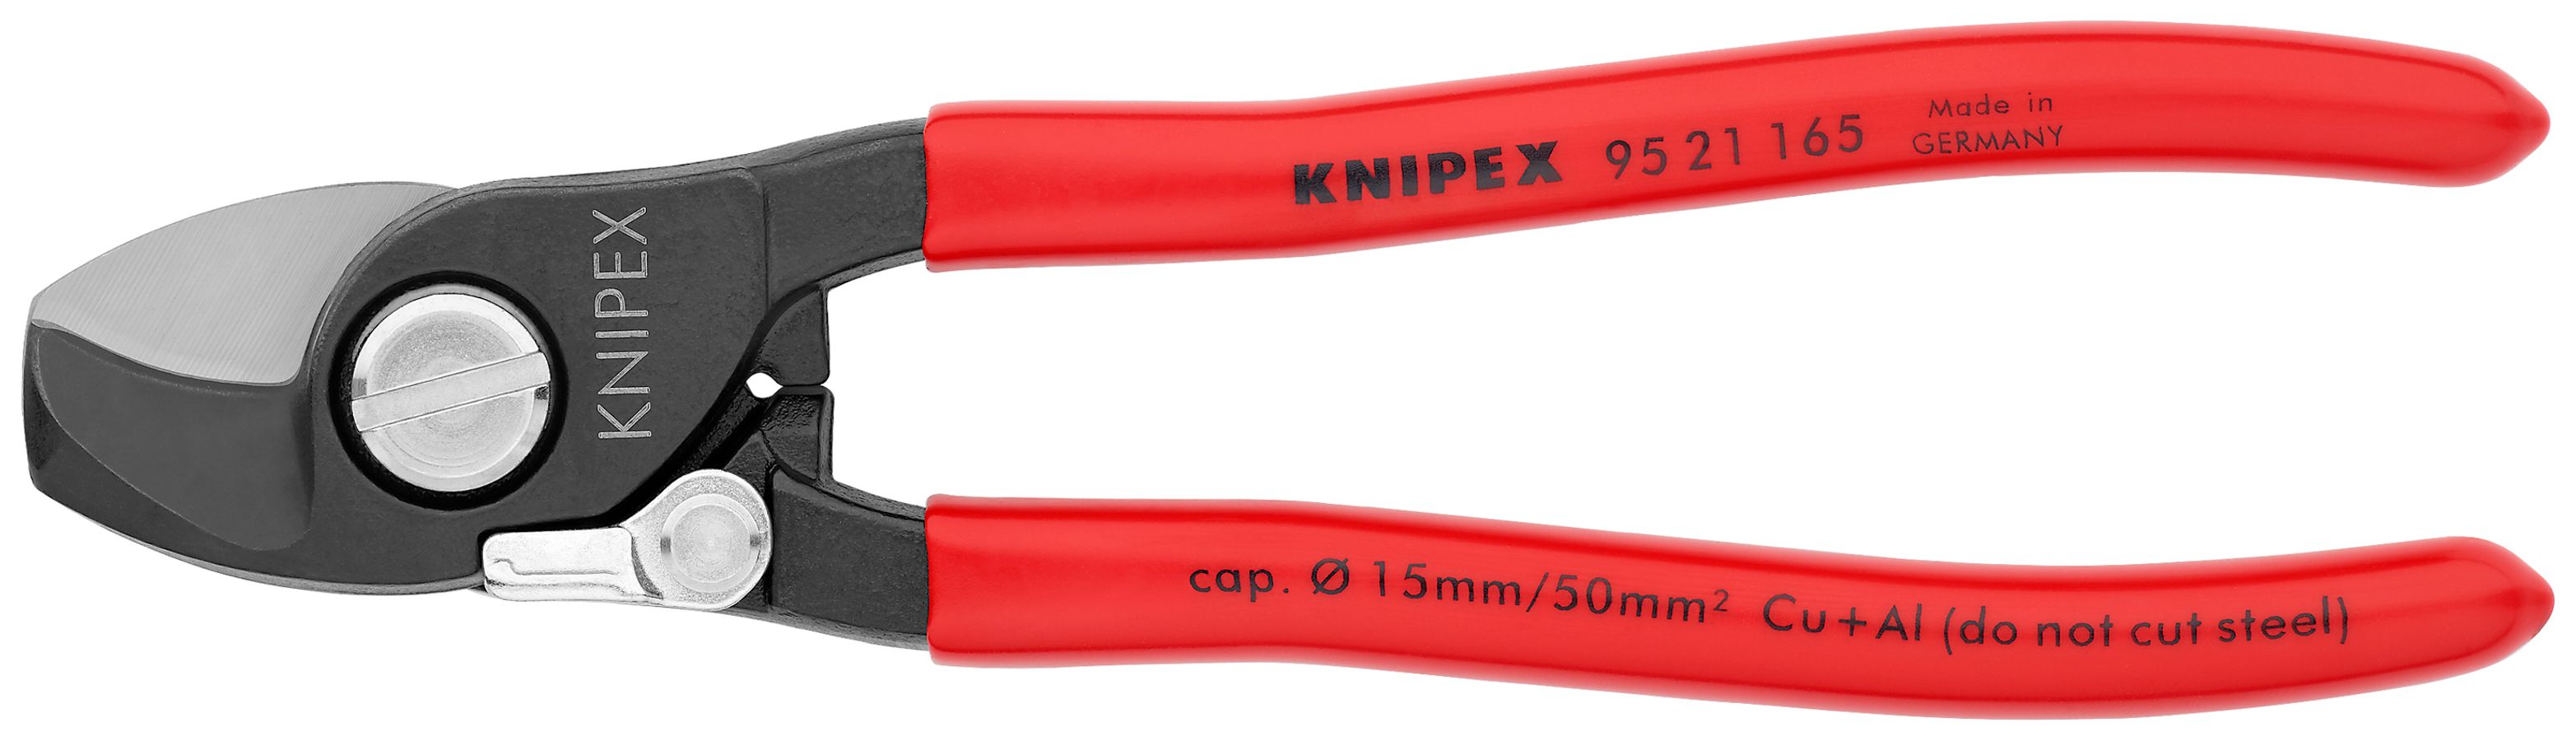 Cable Shears | KNIPEX Tools